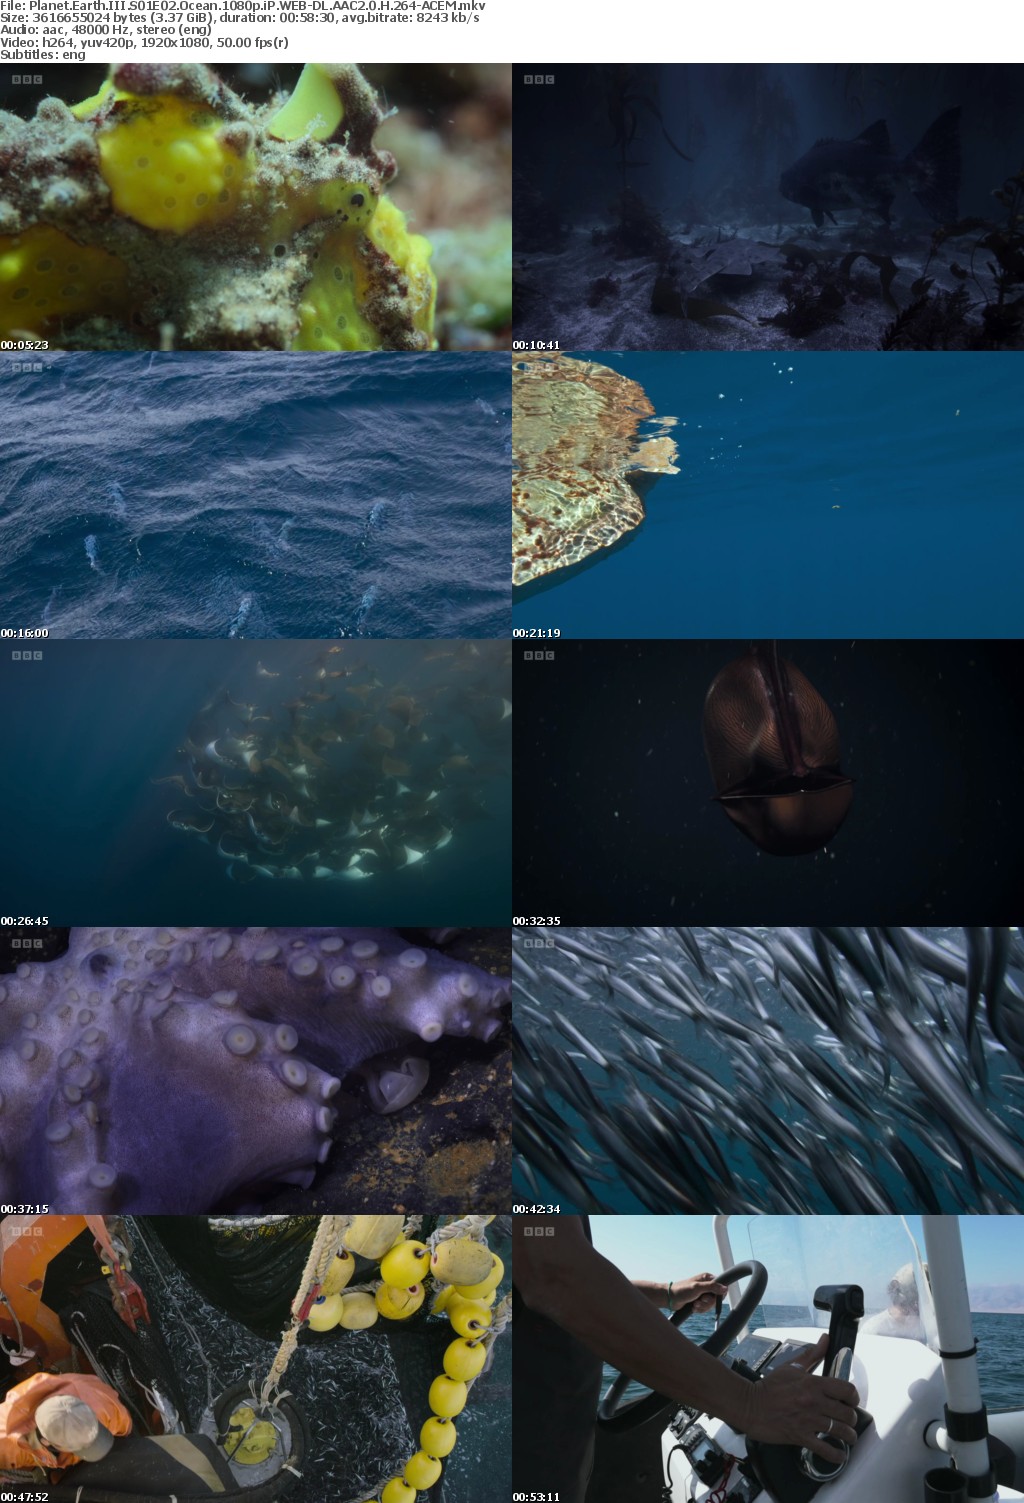 Planet Earth III S01E02 Ocean 1080p iP WEB-DL AAC2 0 H 264-ACEM